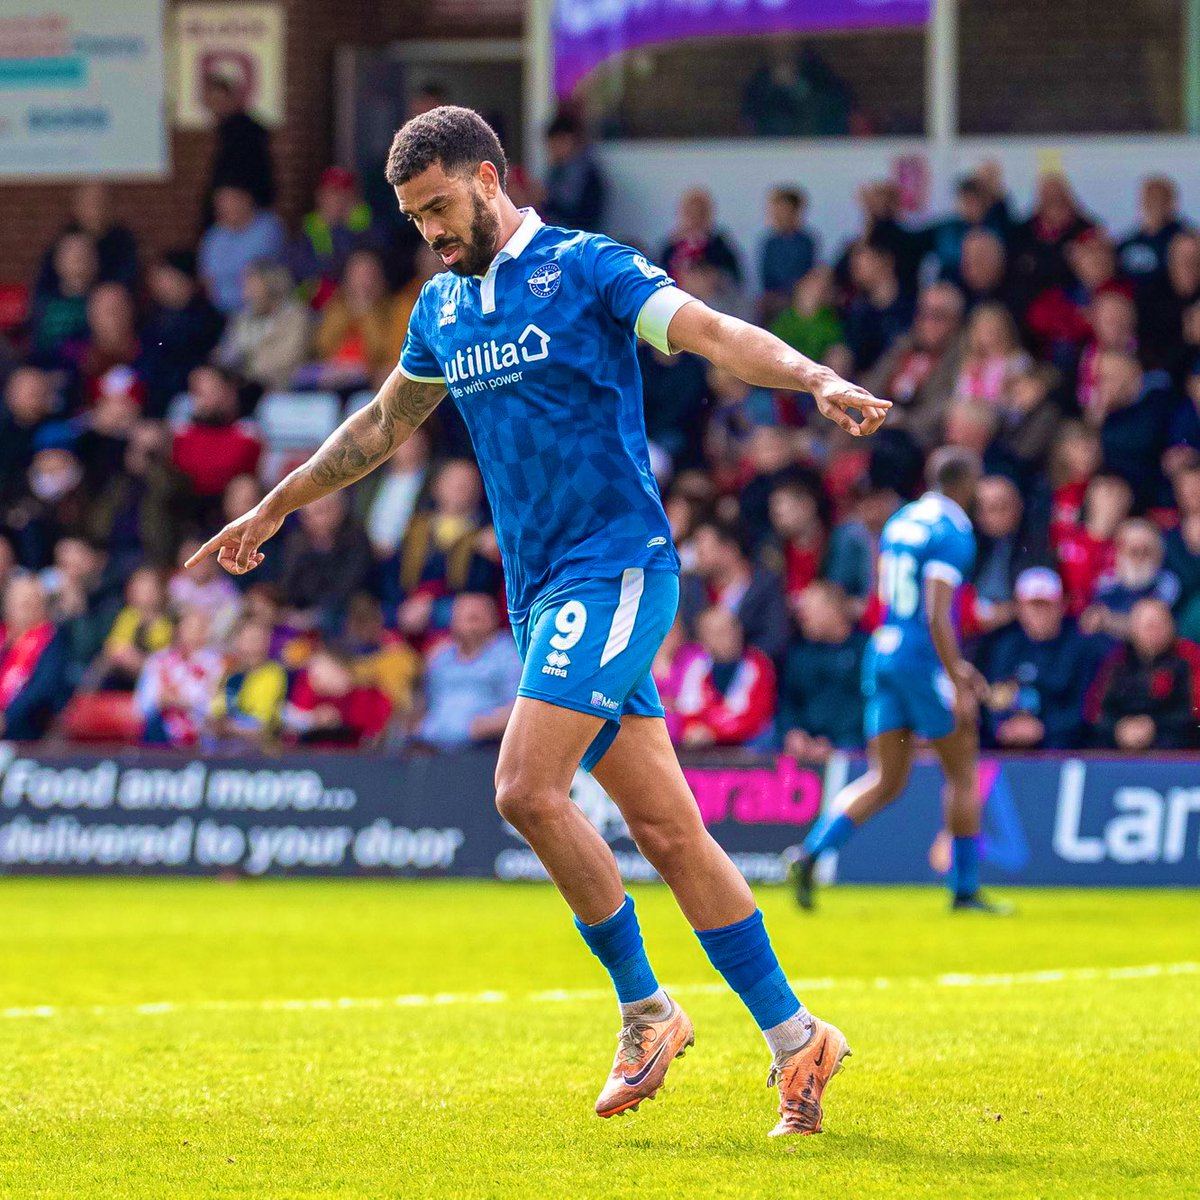 Hearing Paul McCallum heads Southend’s summer targets ✍🏼 Year left on his contract, but he is keen on the move. National League Golden Boot with 31 goals & capped for England C. Reminder that sale needs completing imminently so that John Still can properly work his magic 🪄